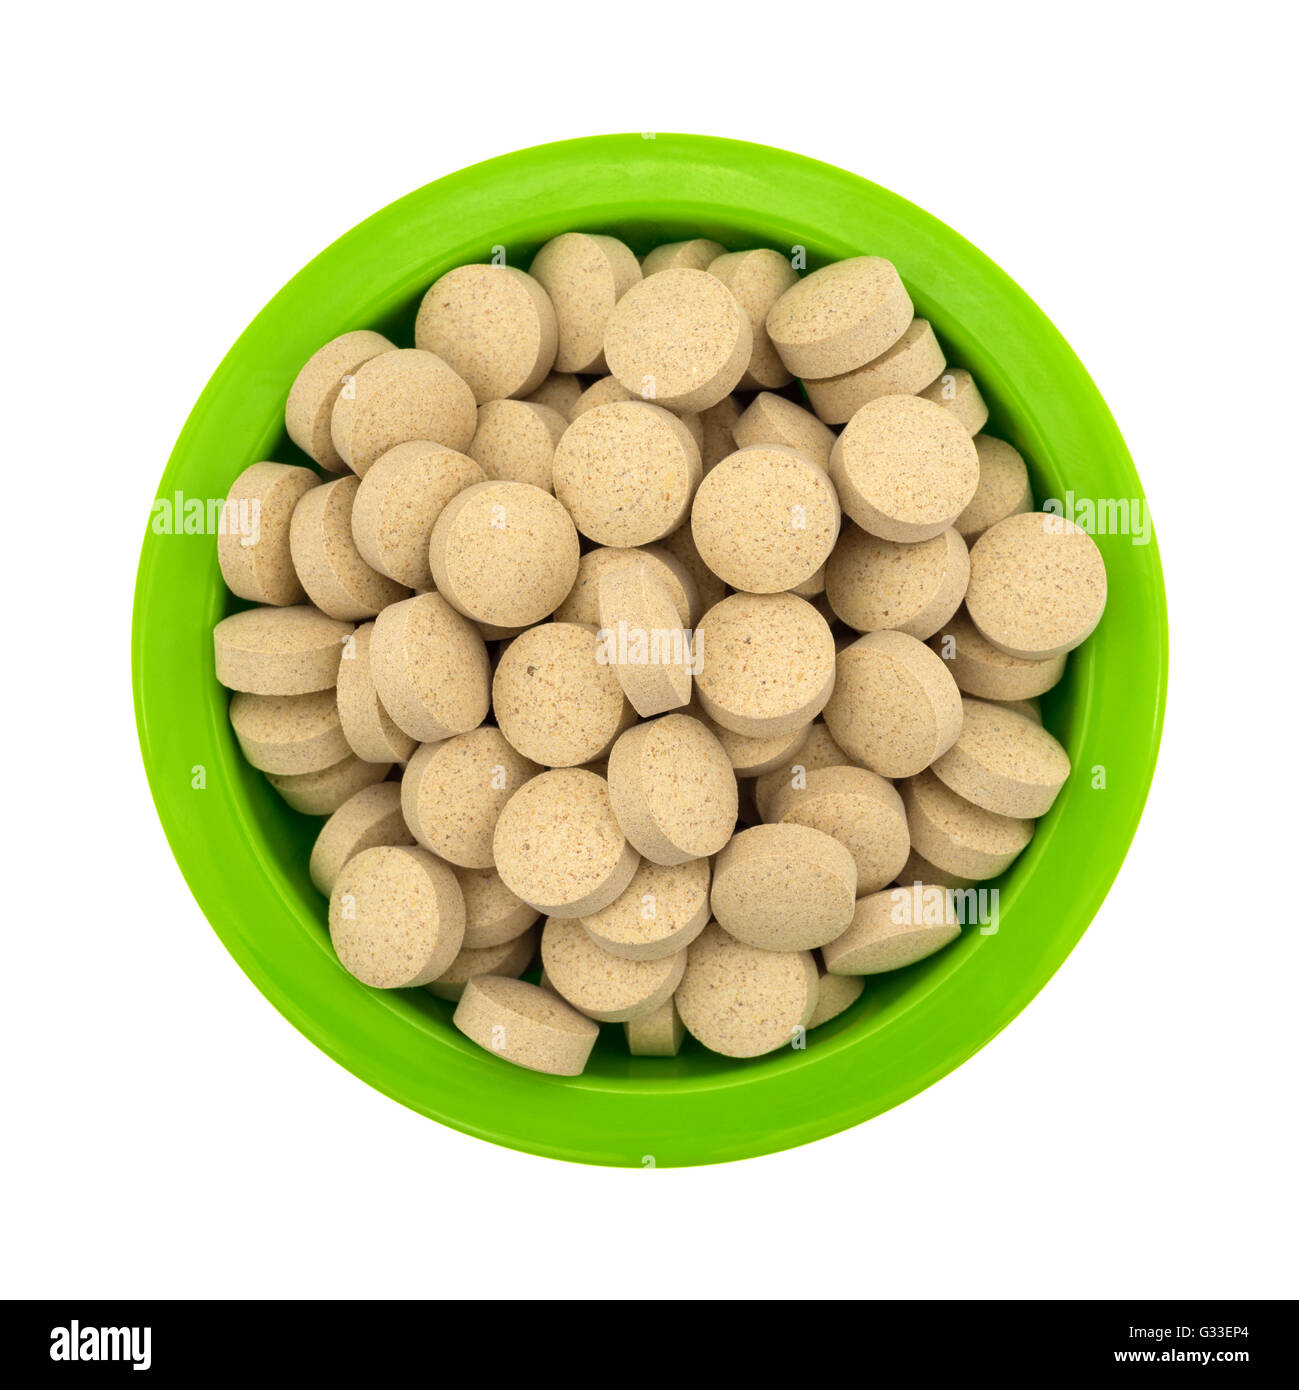 Top view of a green bowl filled with brewer's yeast nutritional supplement tablets isolated on a white background. Stock Photo